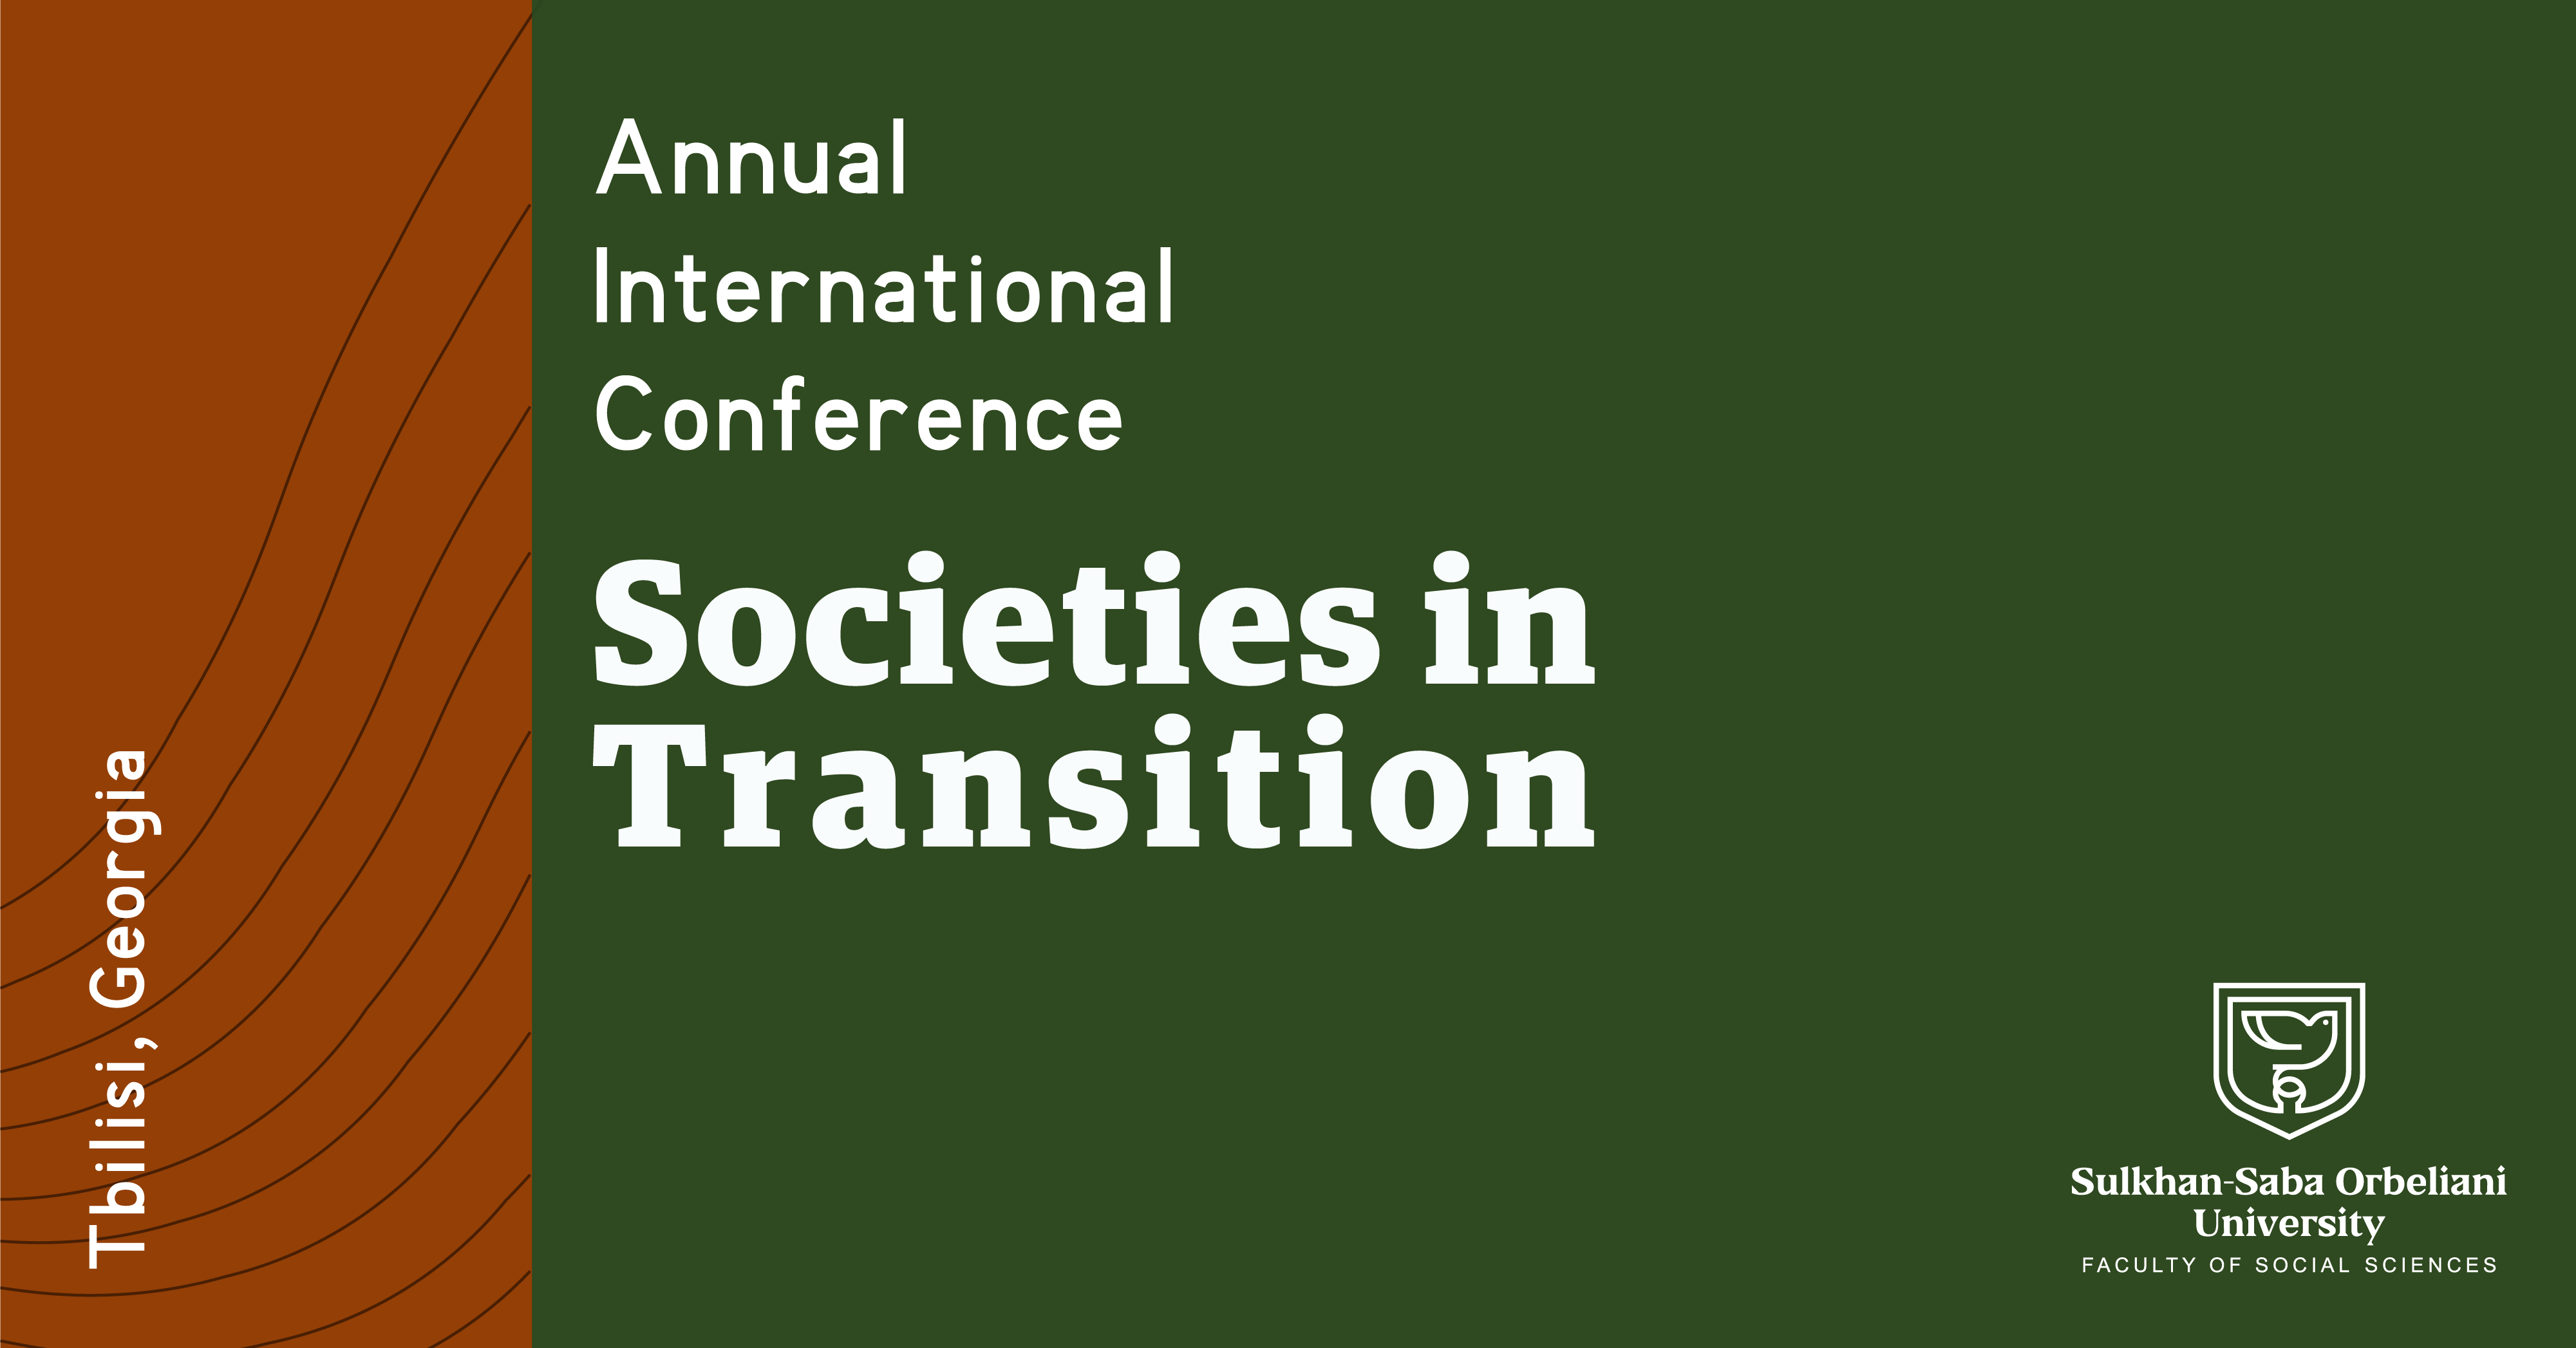 Annual International Scientific Conference ,,Societies in Transition”